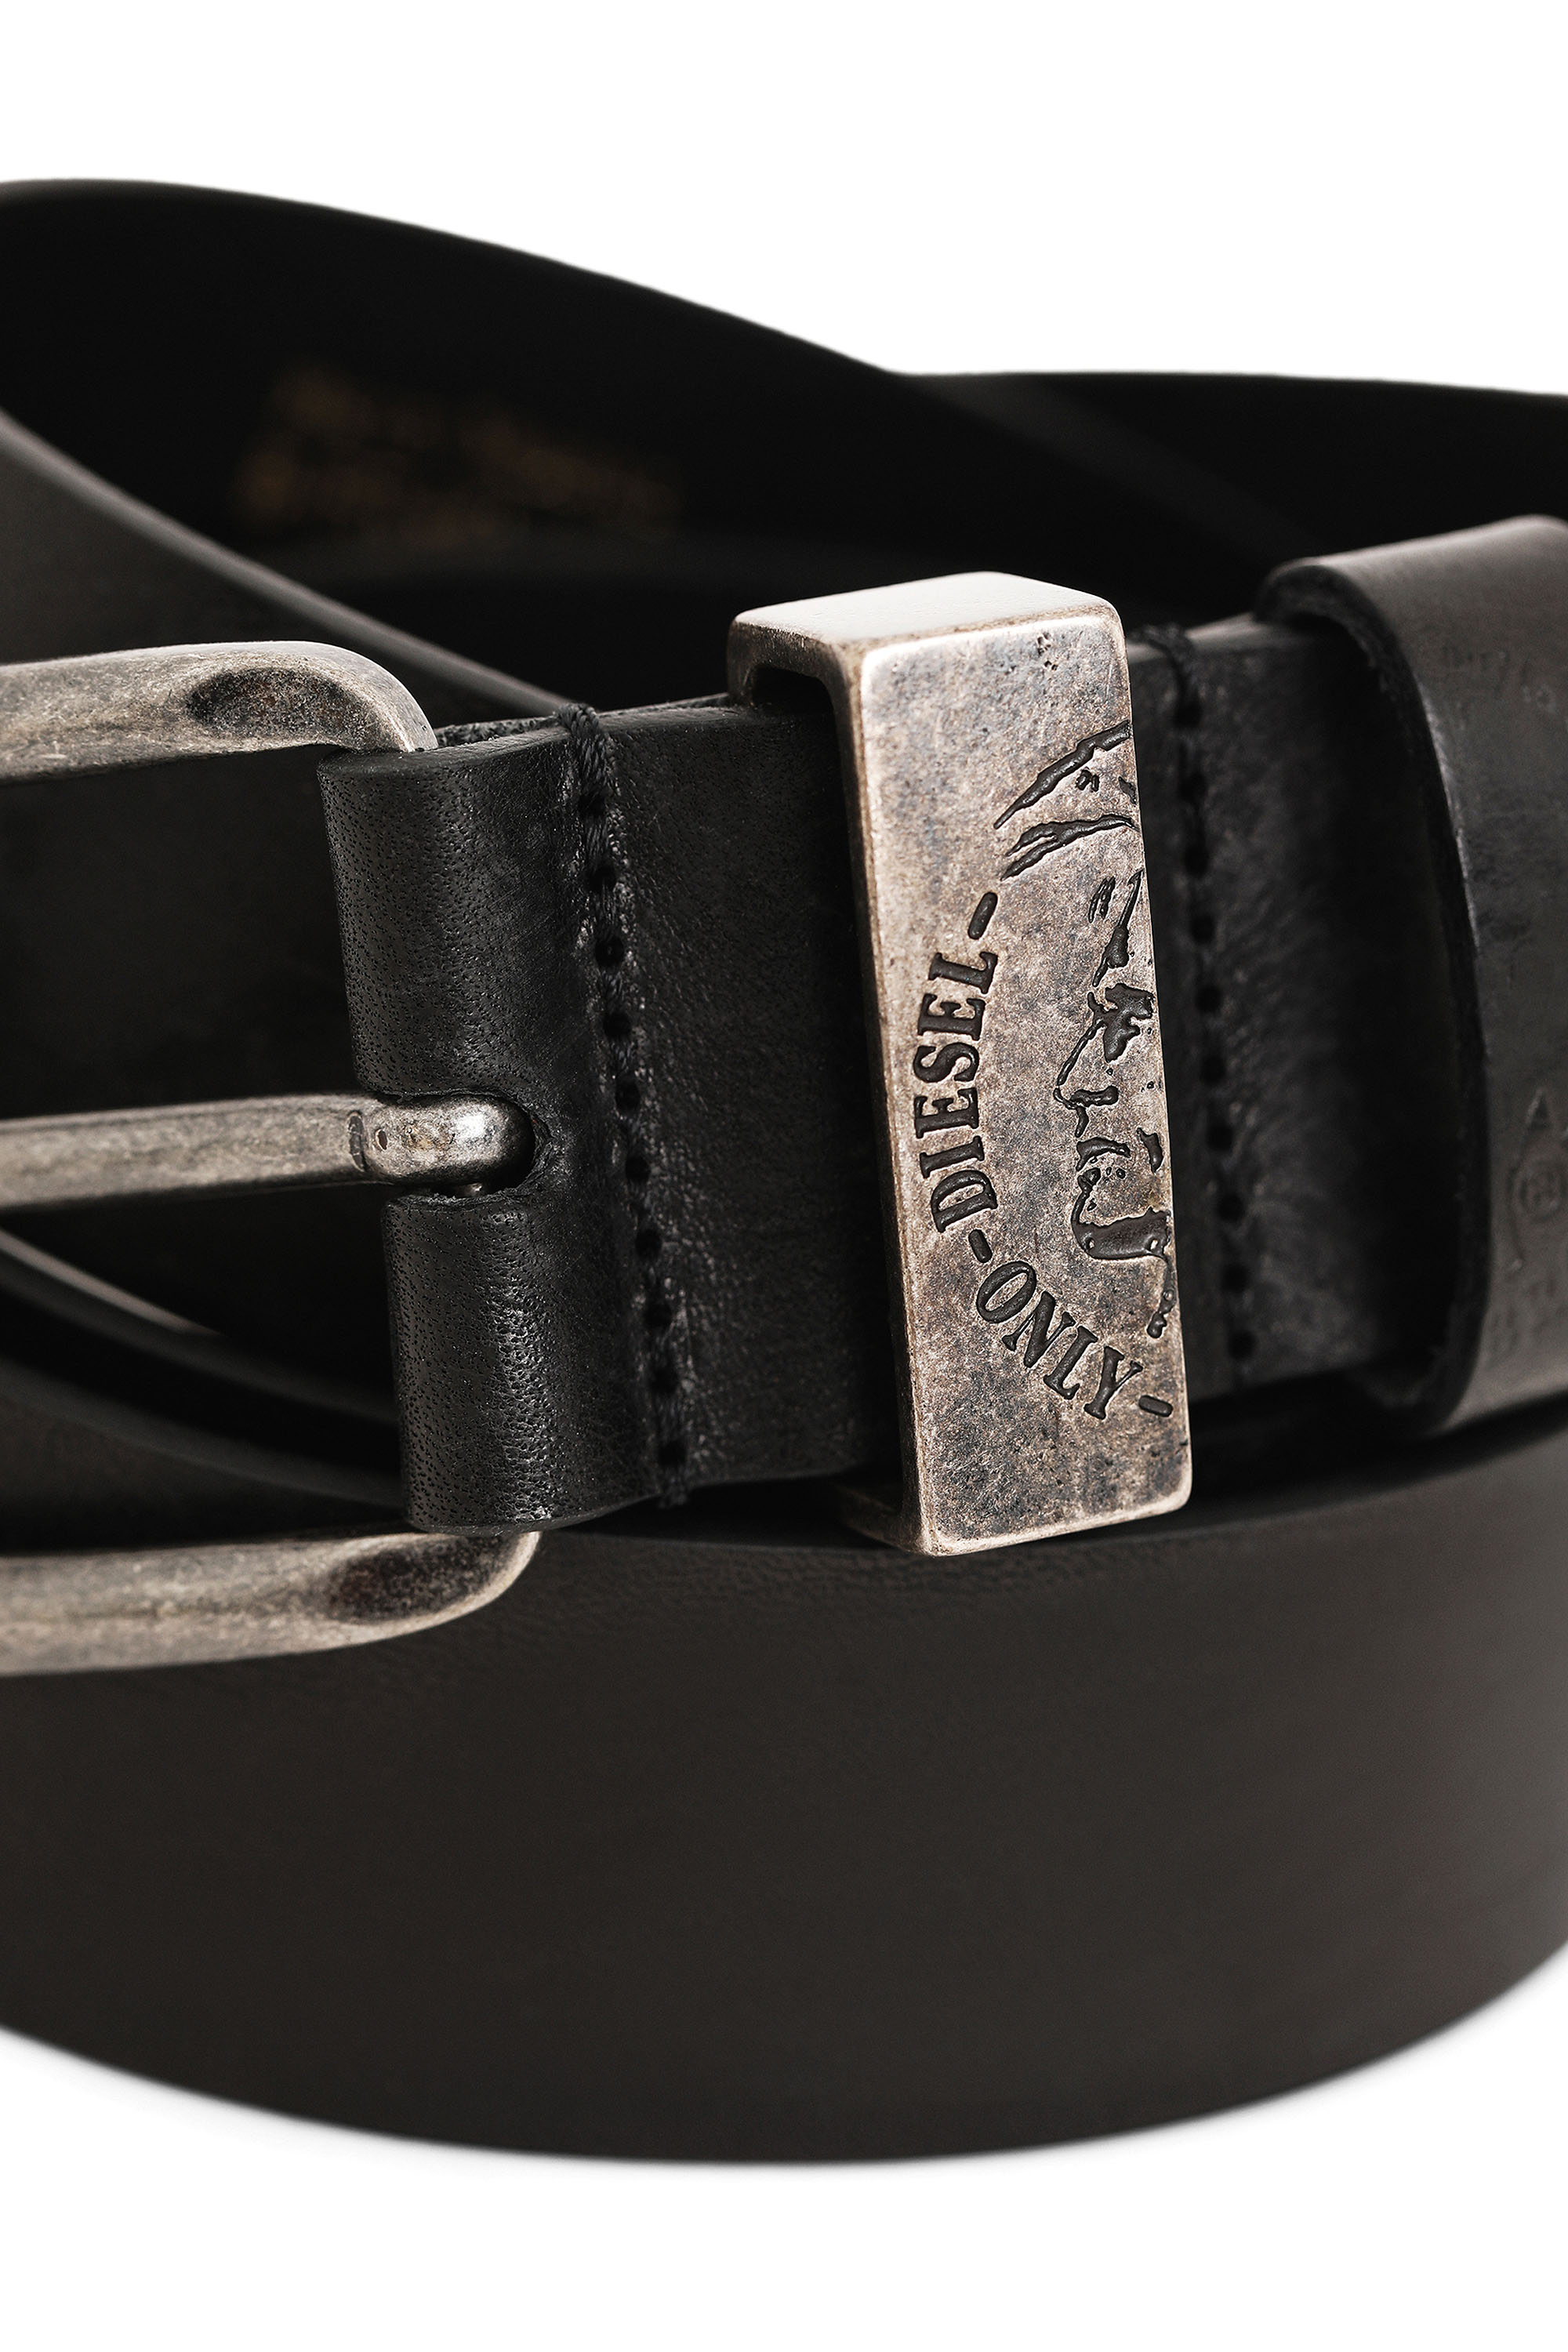 B-FRAG Men: Treated leather belt with faded look | Diesel